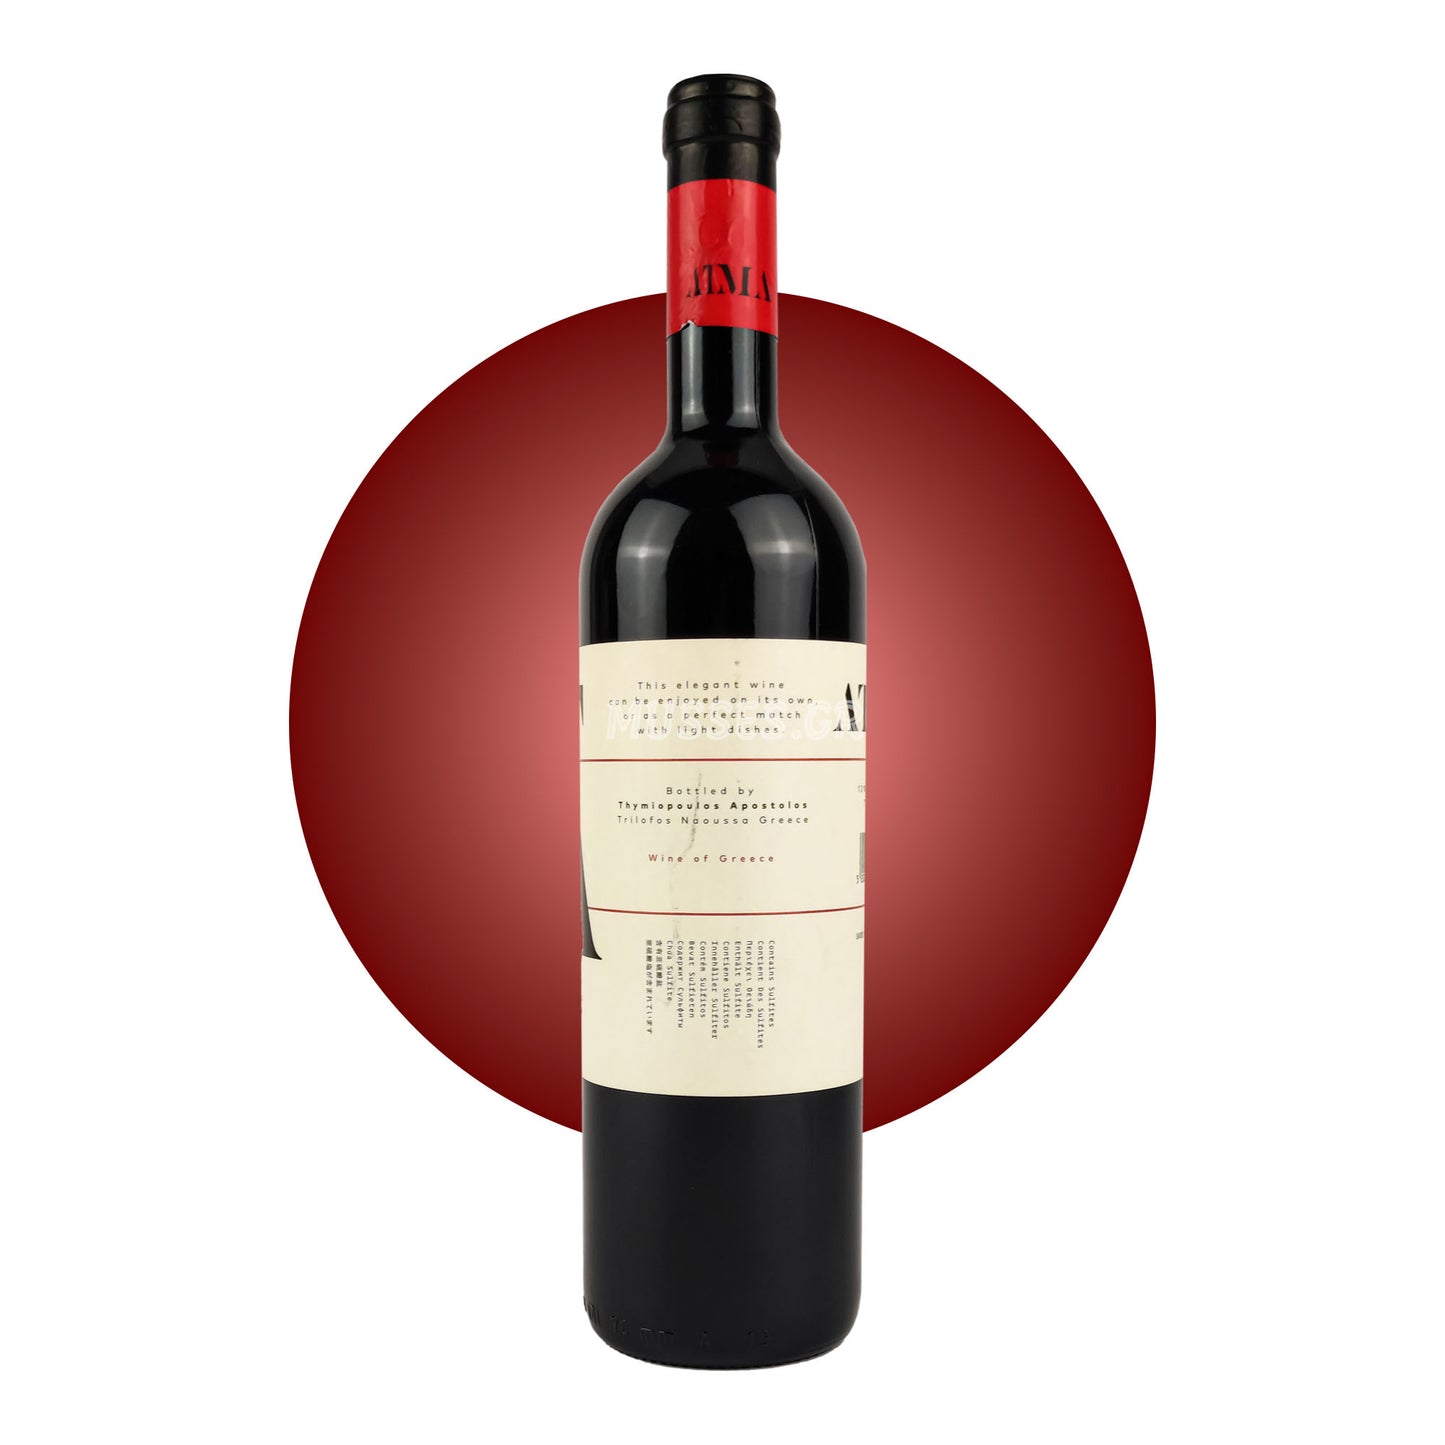 ATMA RED (2019) 750ml - THIMIOPOULOU